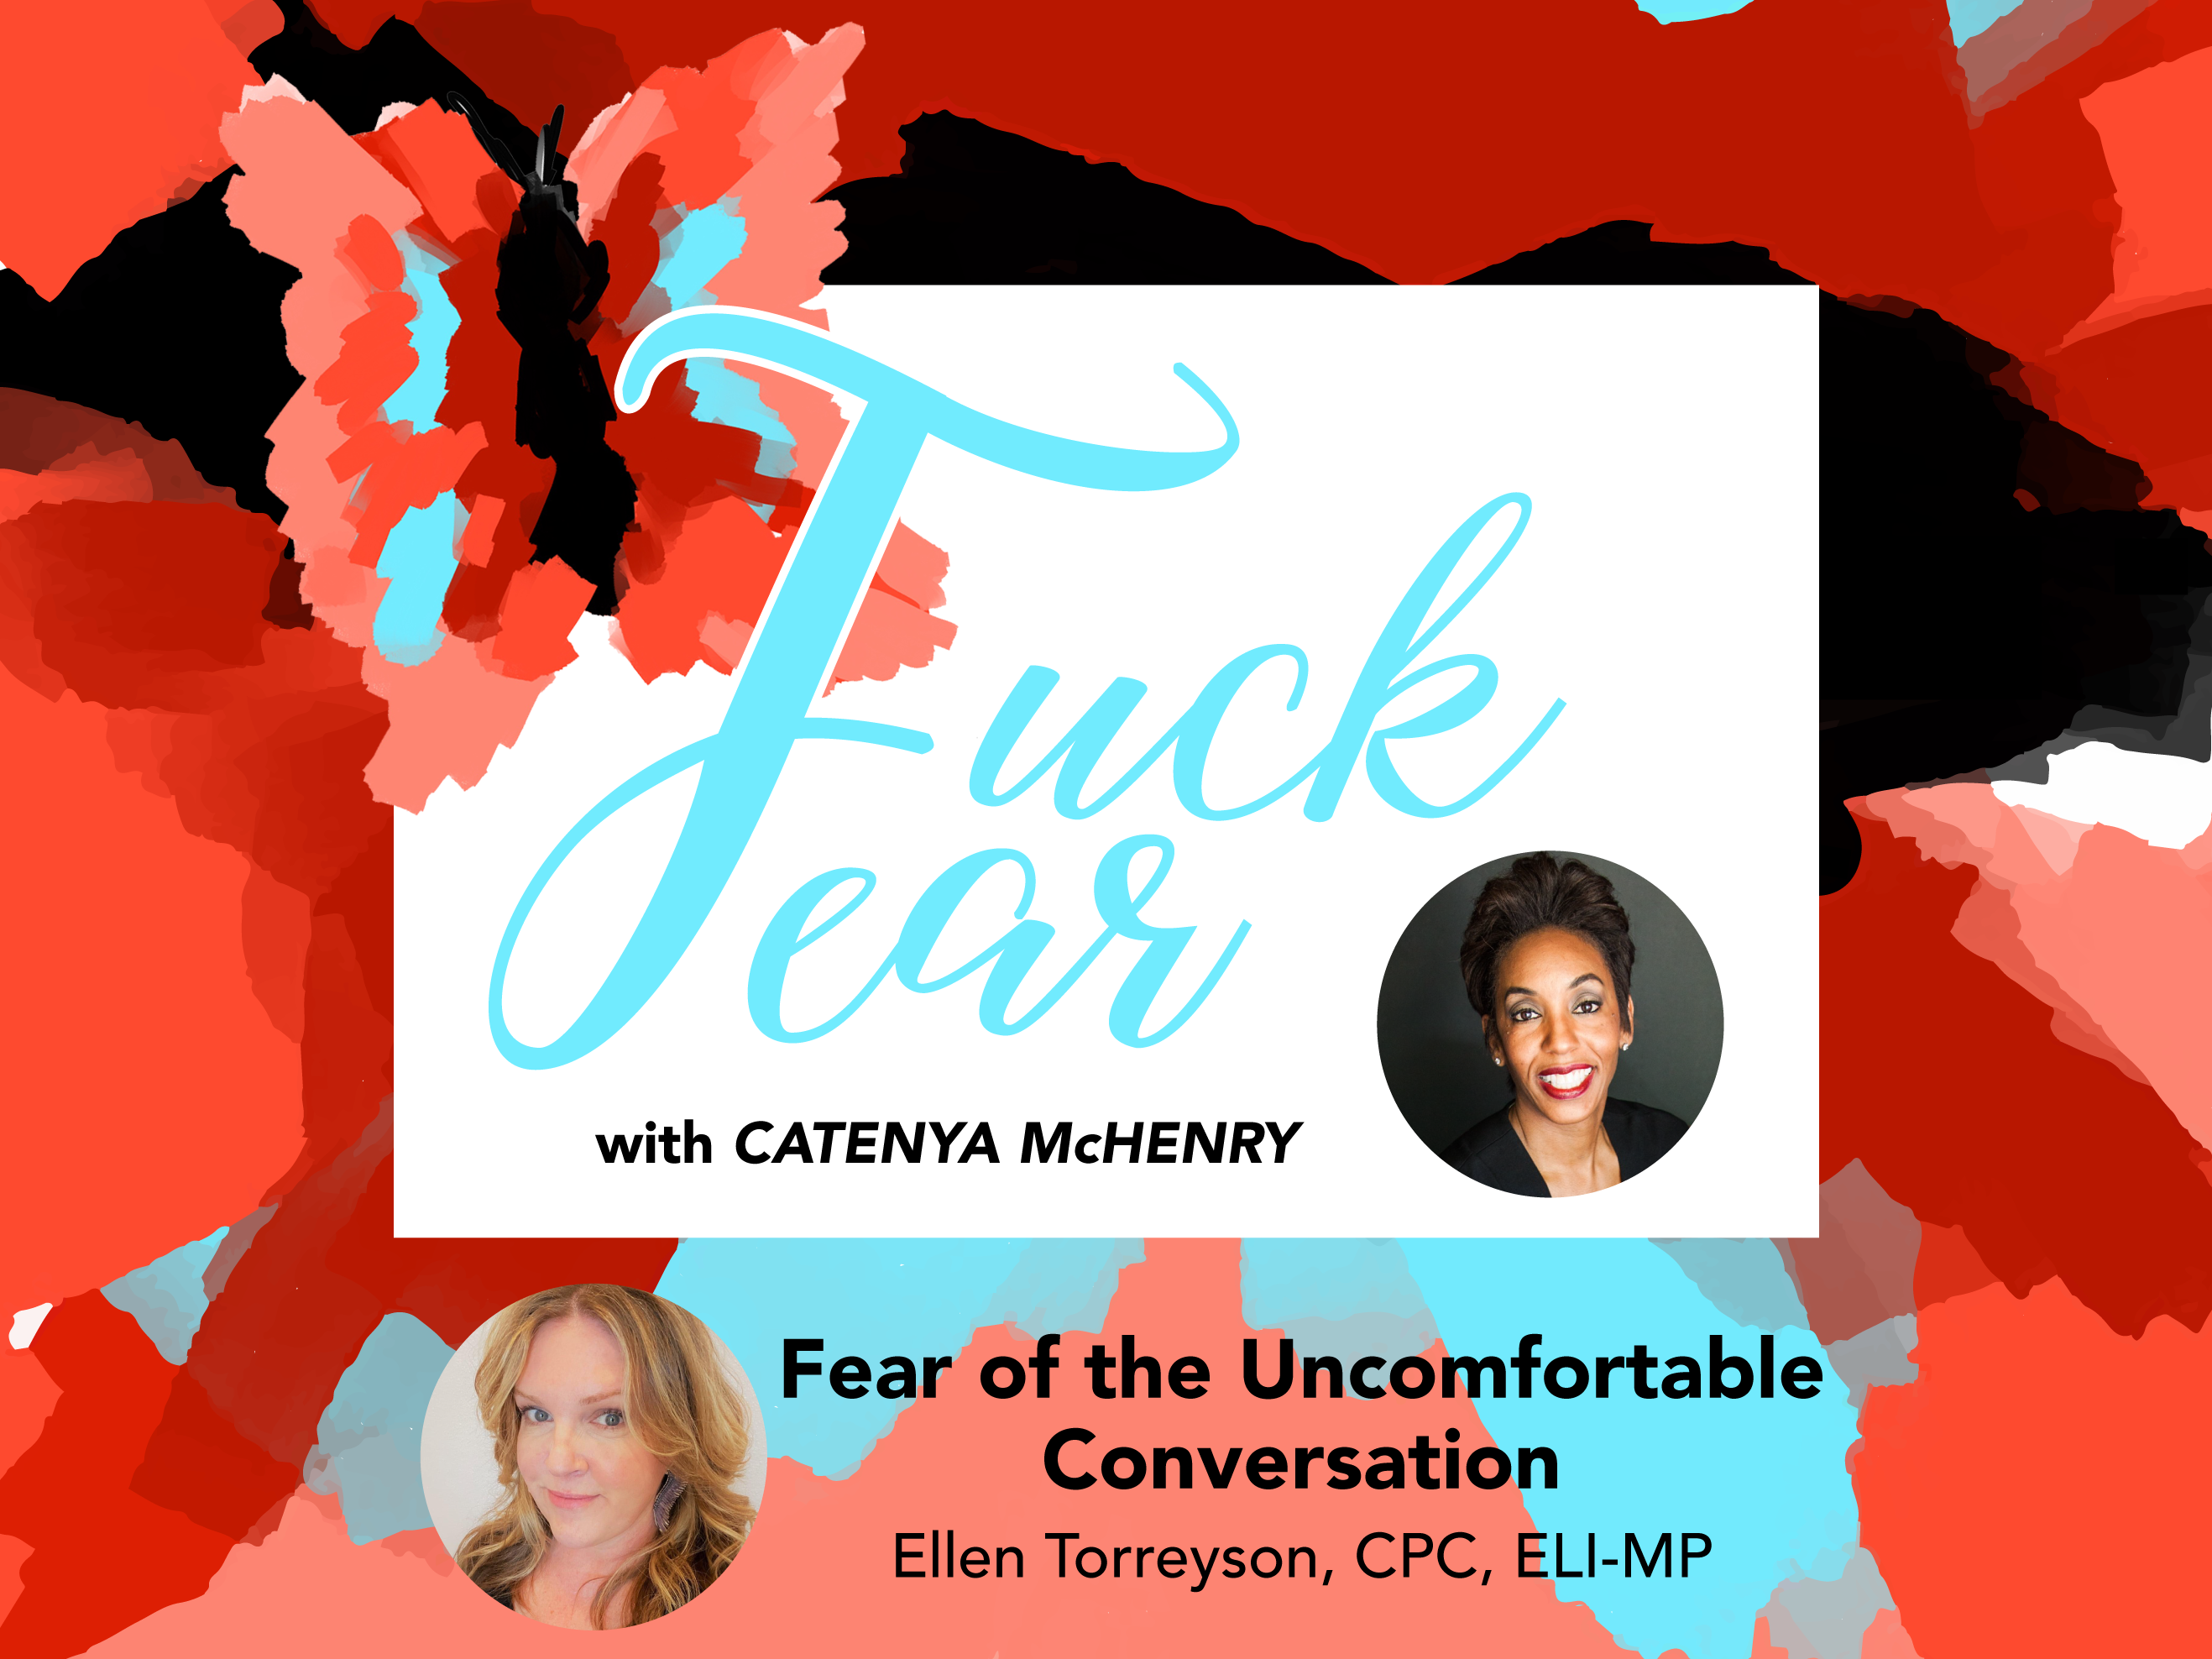 Podcast host Catenya McHenry interviews Austin-based Life Coach Ellen Torreyson about fear of uncomfortable conversations. We talk about why humans are afraid and she gives tips of how to ease the awkwardness. 